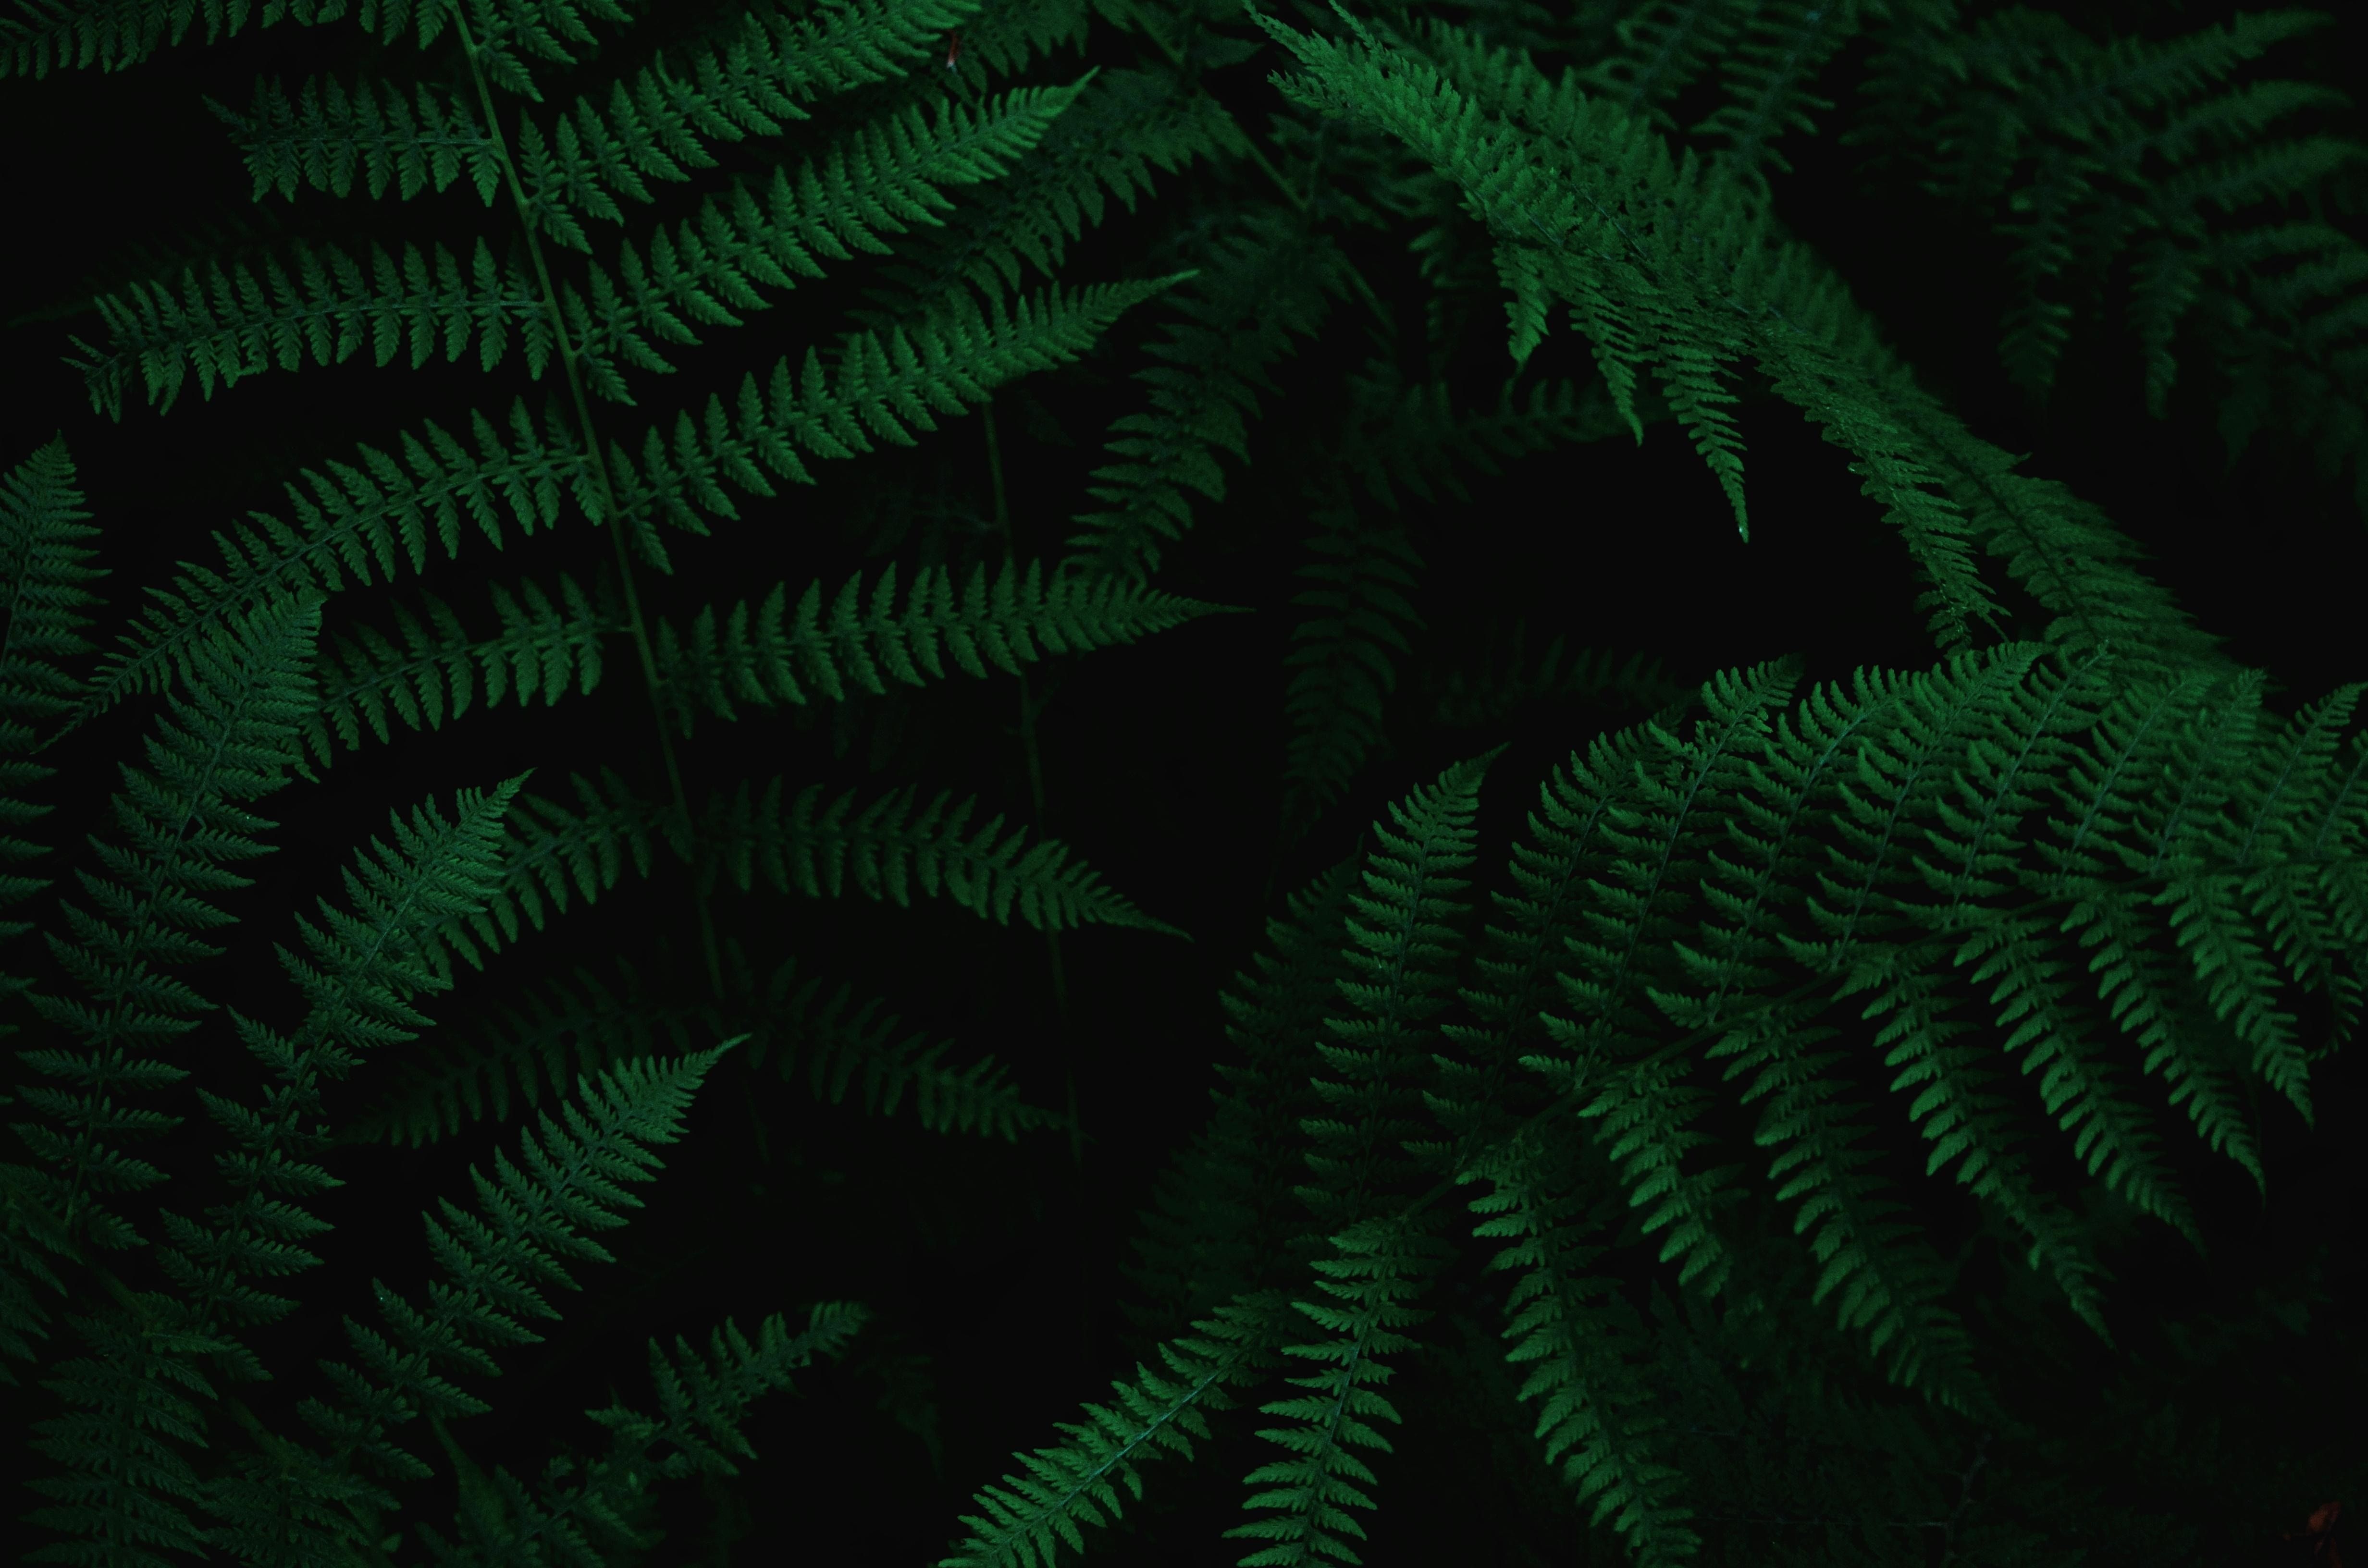 4928x3264 #moody, #forest, #green, #nature, #texture, #Creative Commons image, #wallpaper, #leaf, #plant, #shadow, #leaves, #tree, #fern, #leafe, #detail. Mocah HD Wallpaper